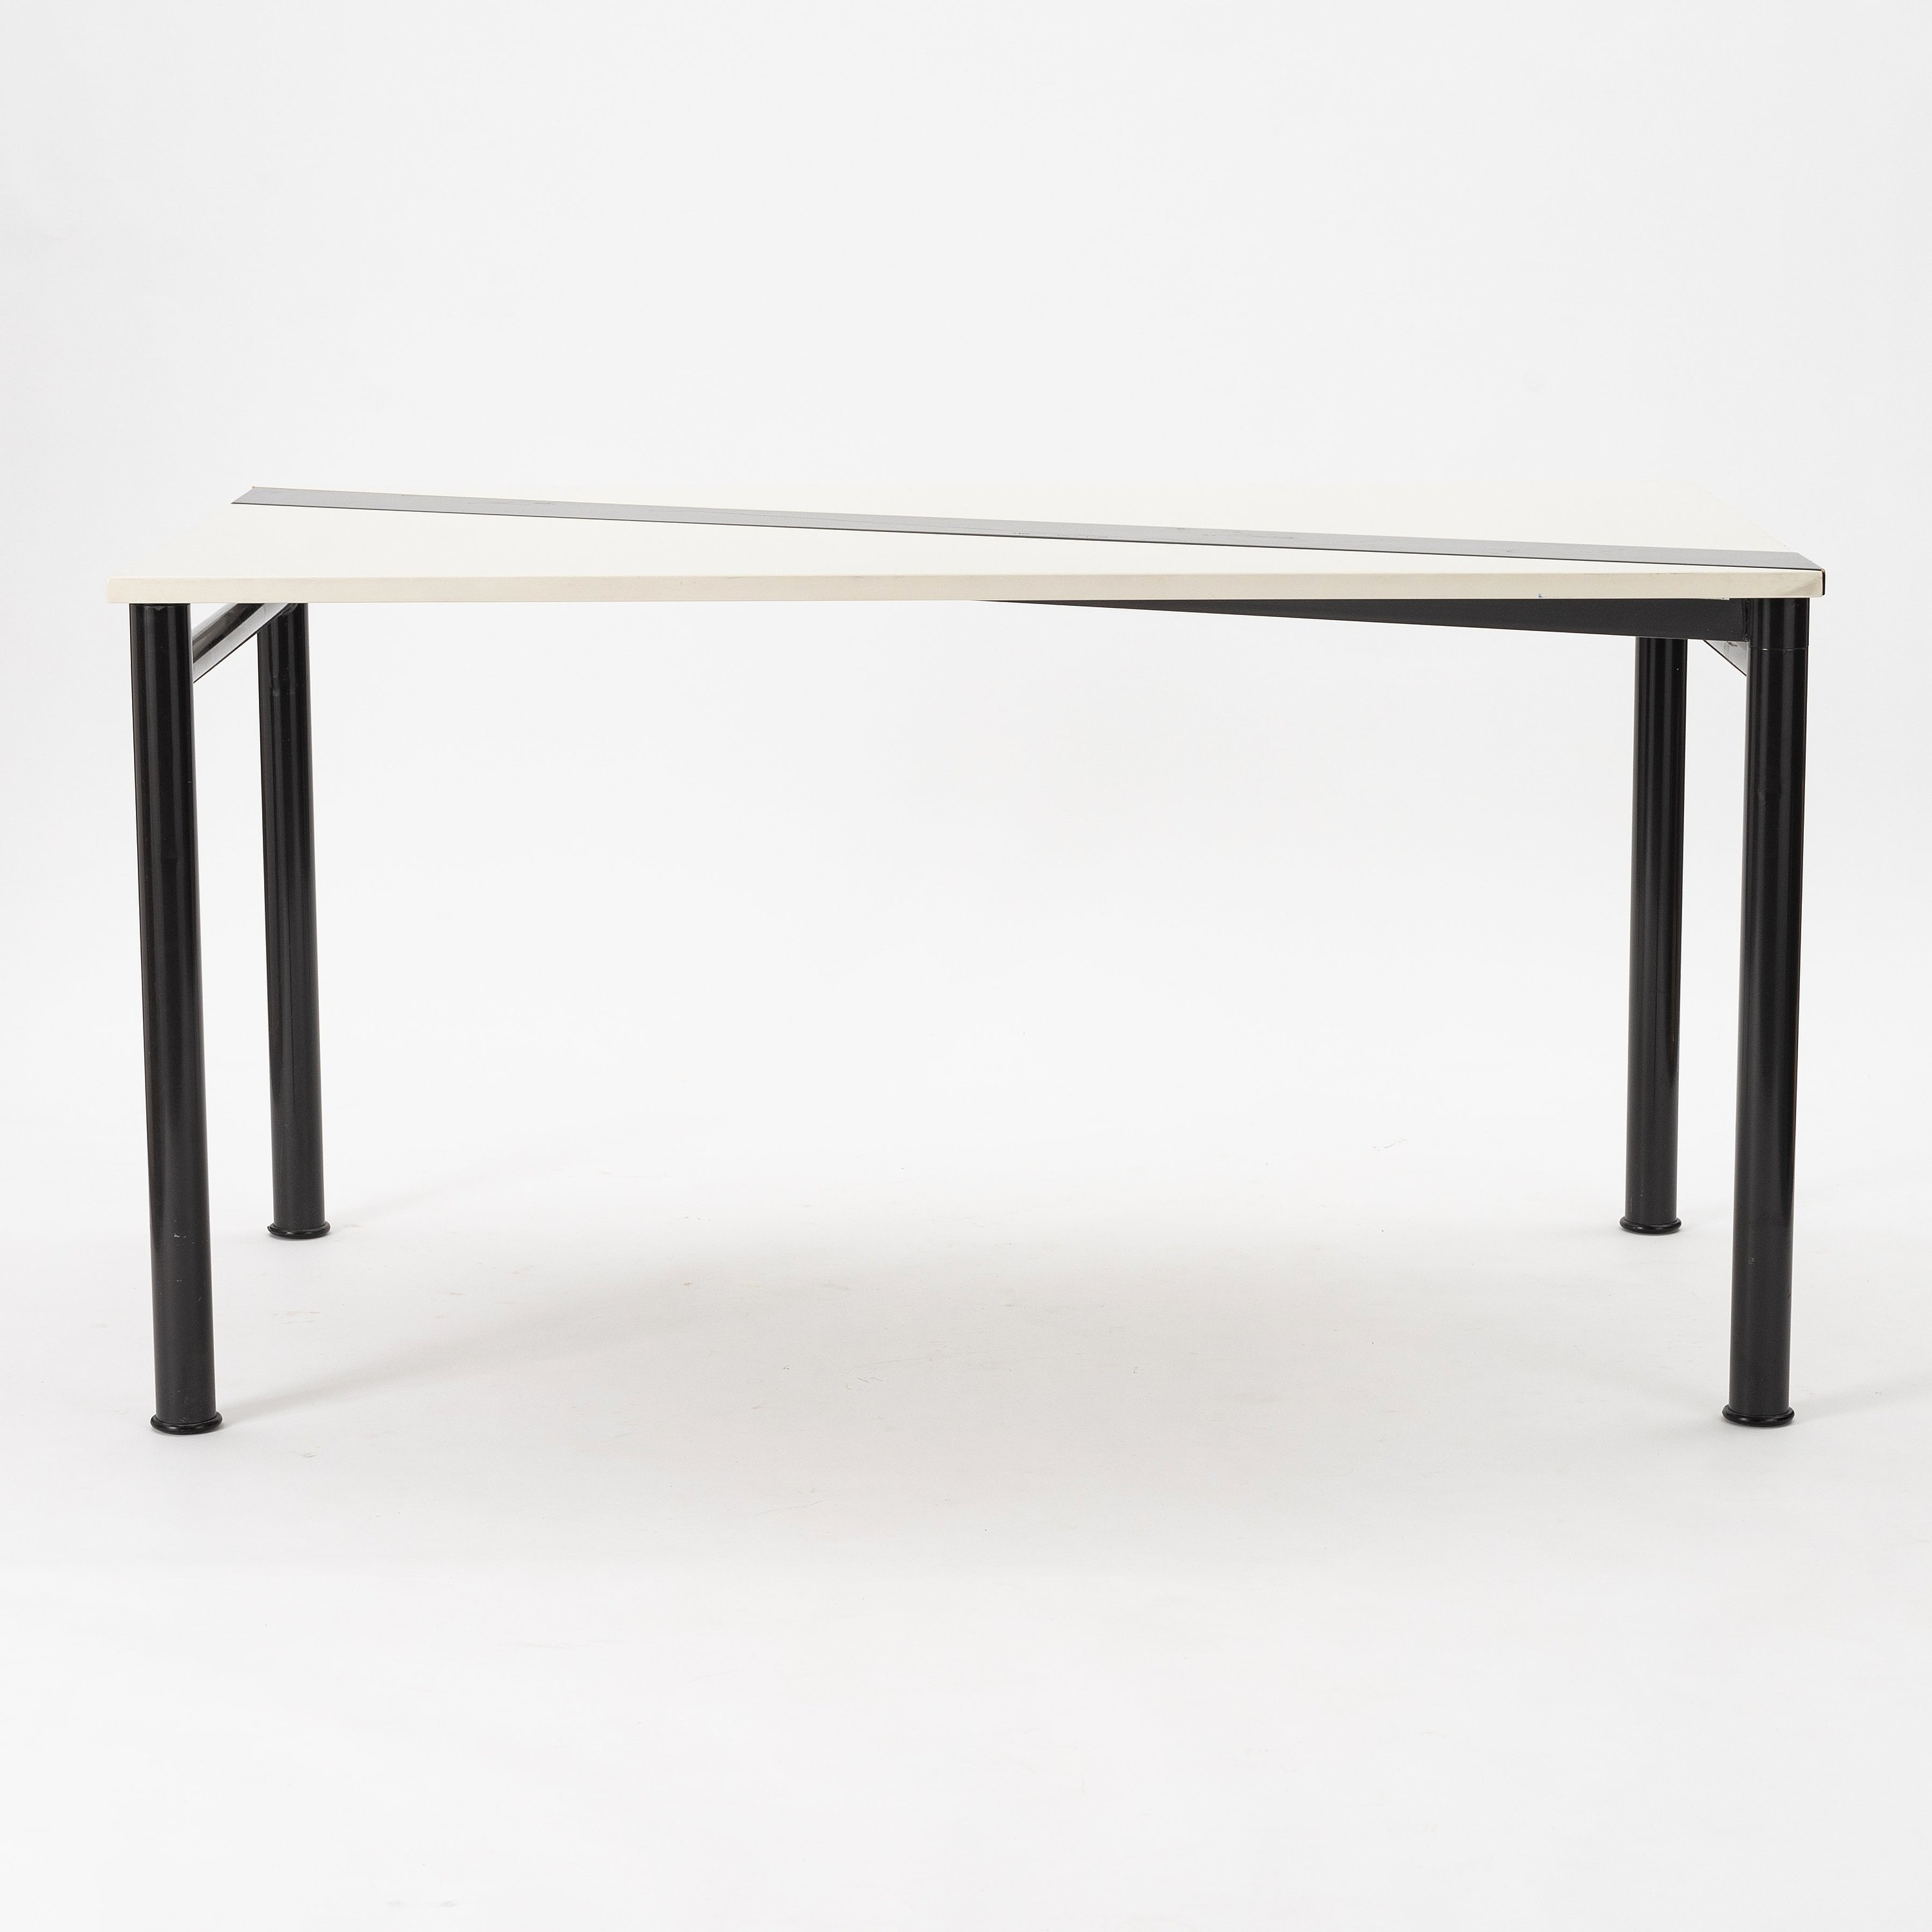 Ikea, a folding table, possibly a prototype from the Tomorrow collection  1980-90s.